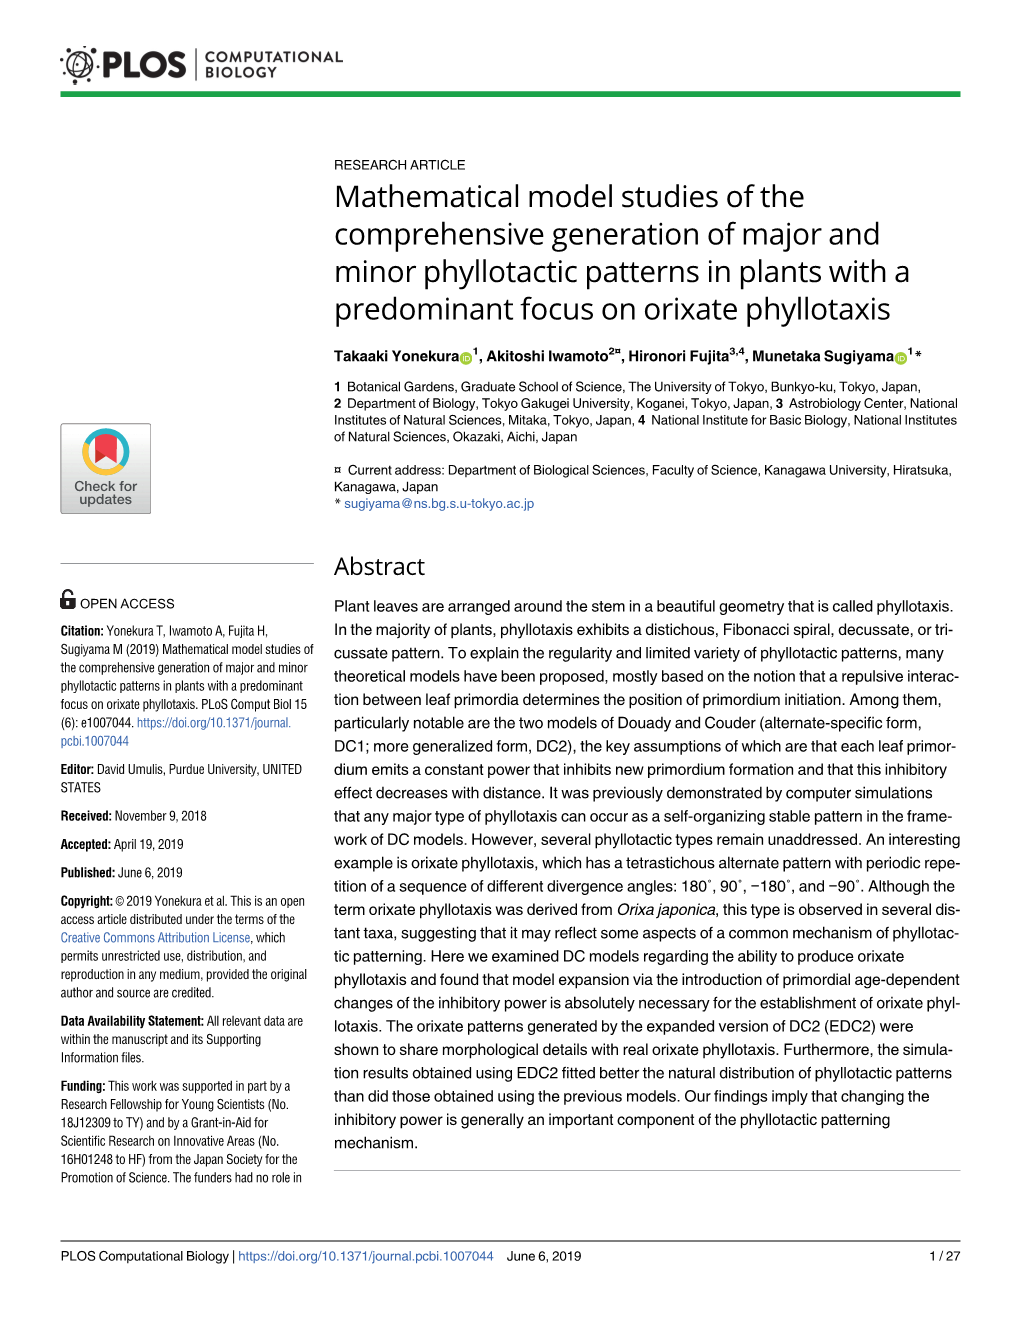 Mathematical Model Studies of the Comprehensive Generation of Major and Minor Phyllotactic Patterns in Plants with a Predominant Focus on Orixate Phyllotaxis